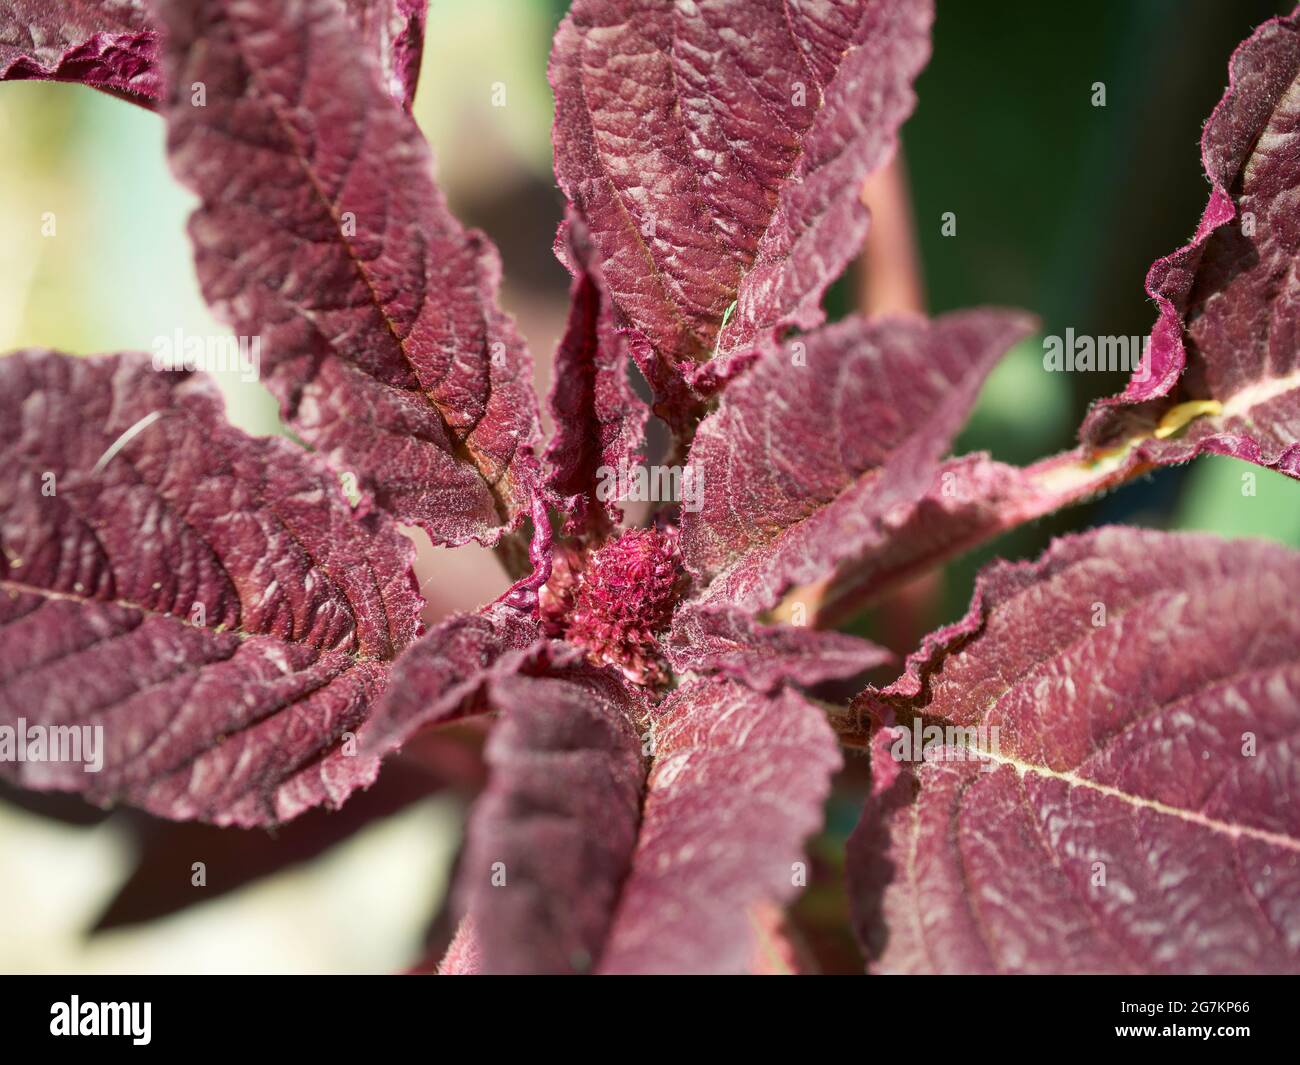 Amaranth plant, close-up. A plant with crimson leaves. Stock Photo